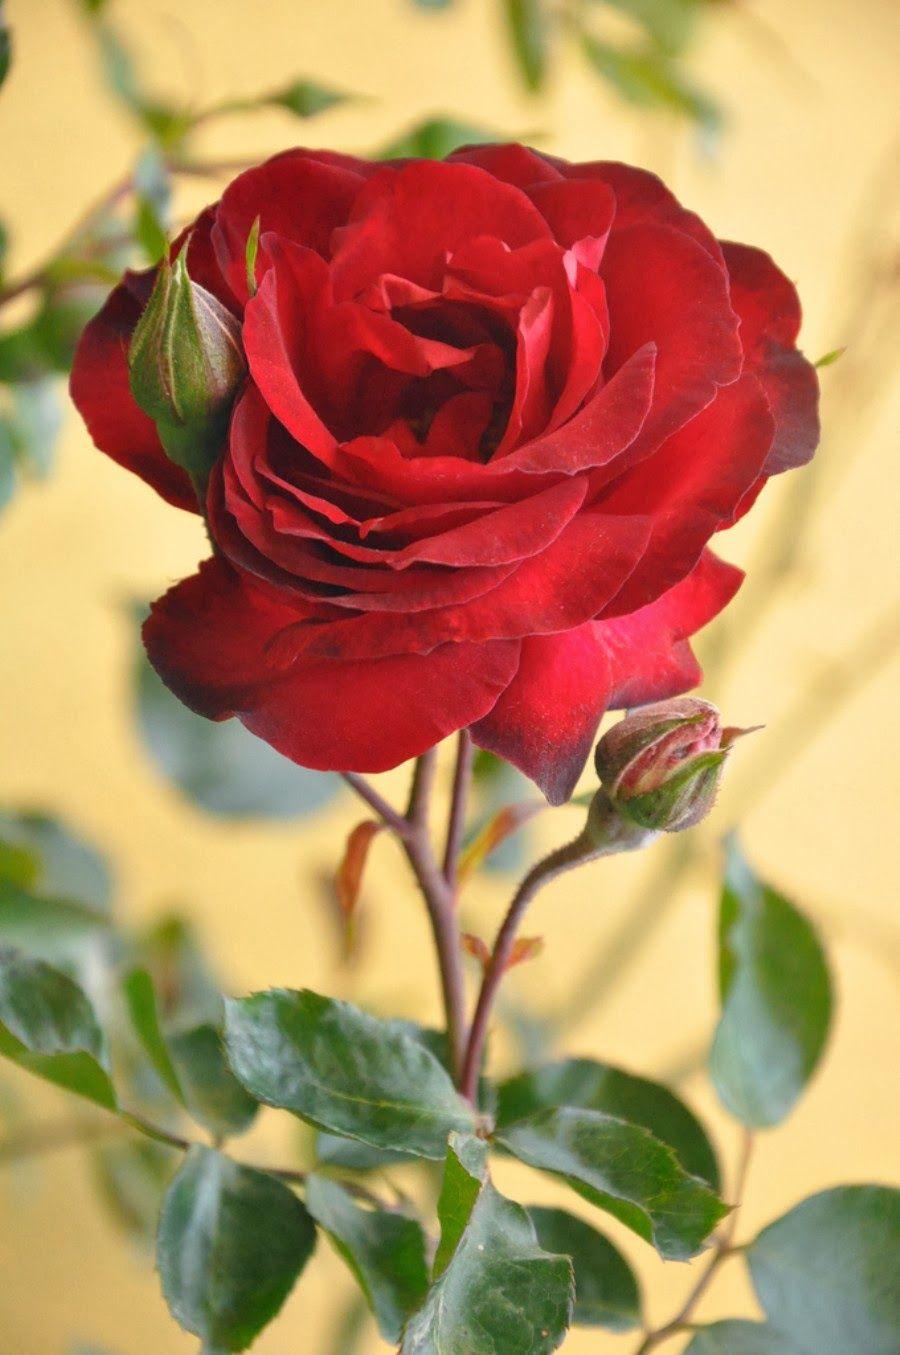 Hd Wallpapers Red Rose Flower For Mobile